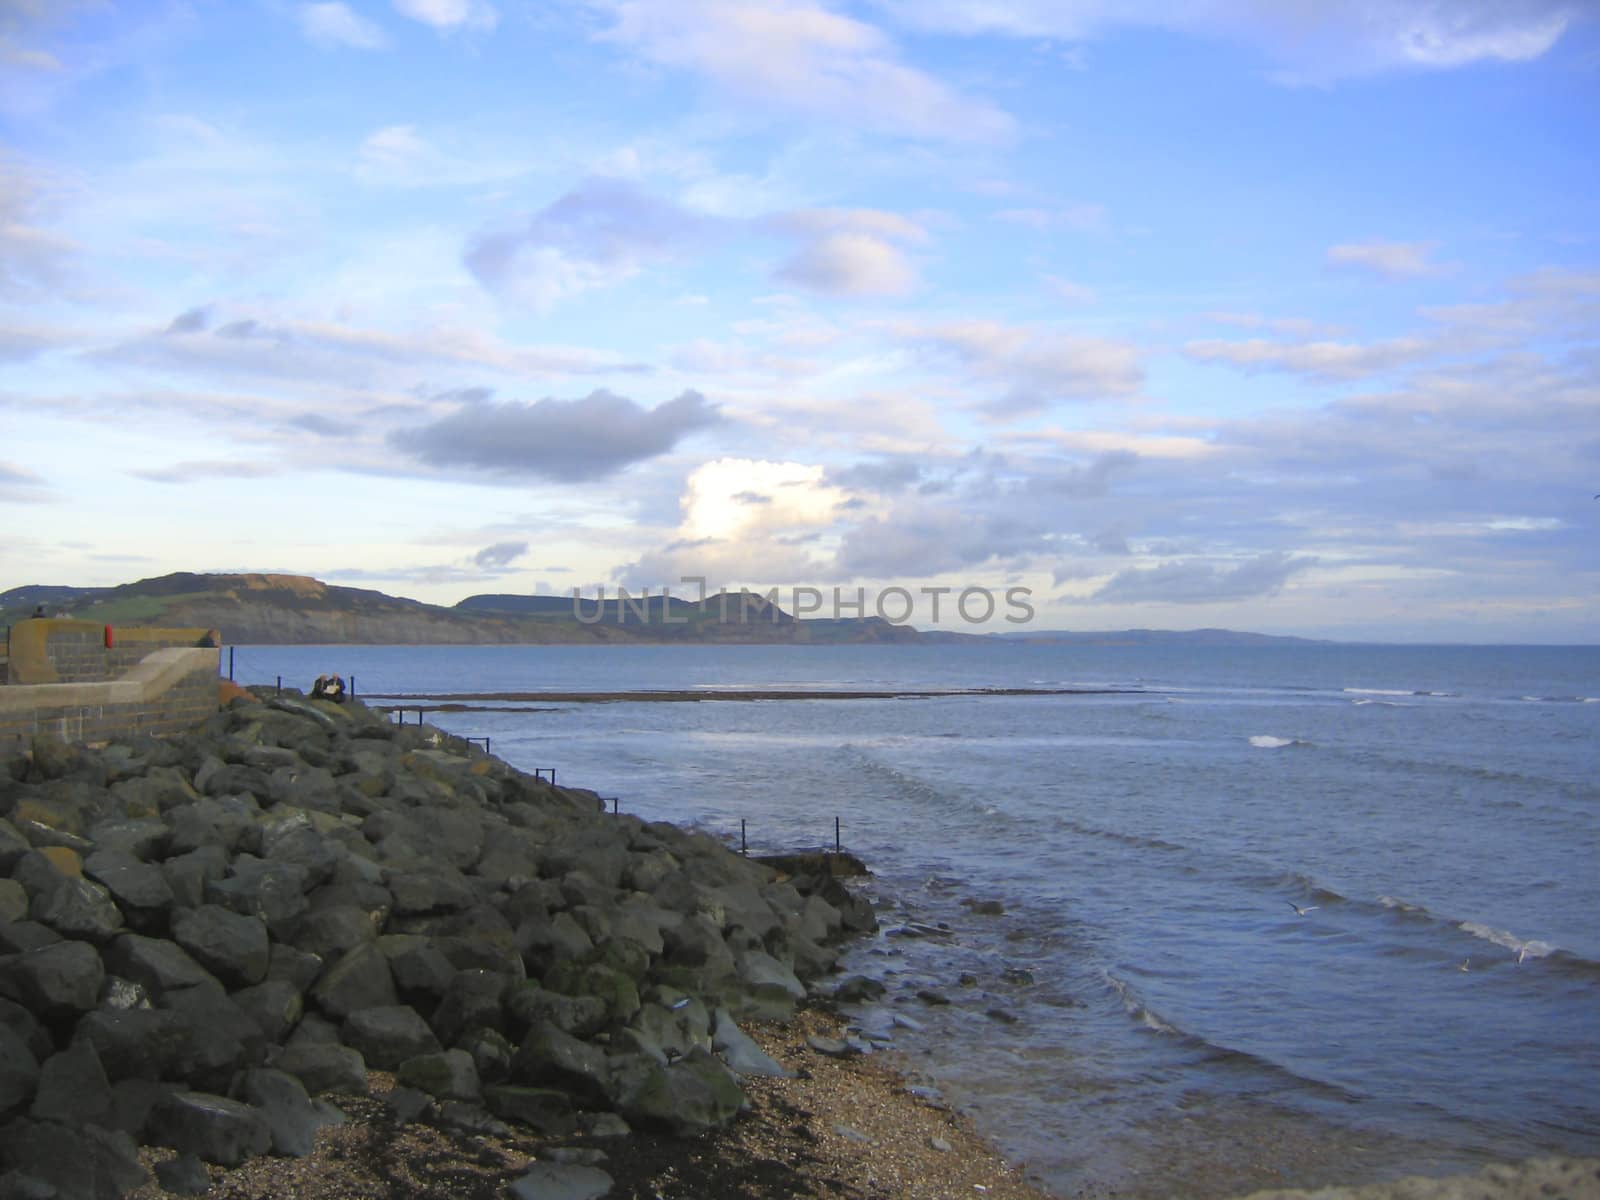 Dorset's Jurassic Coast in England at Lyme Regis which is Famous for the collecting of dinosaur fossils.